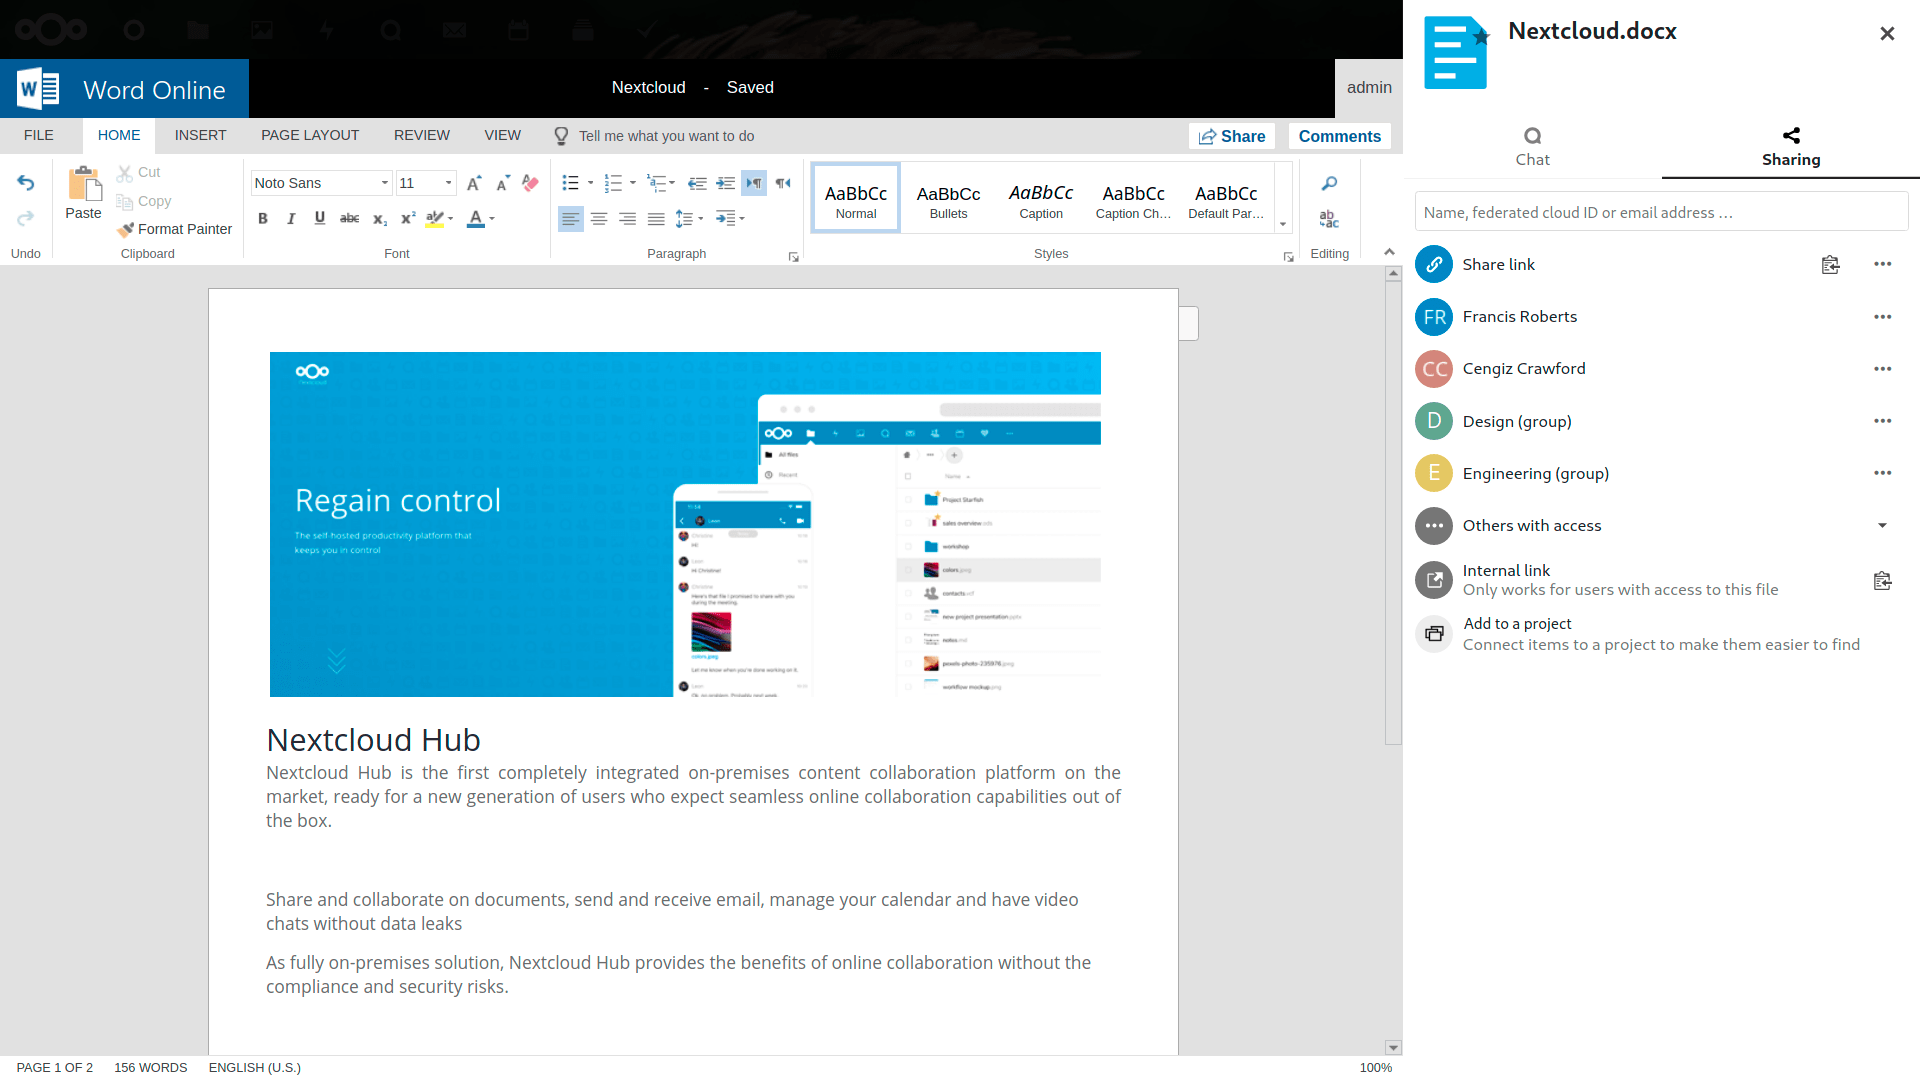 MS Office Online Server as document editor in Nextcloud